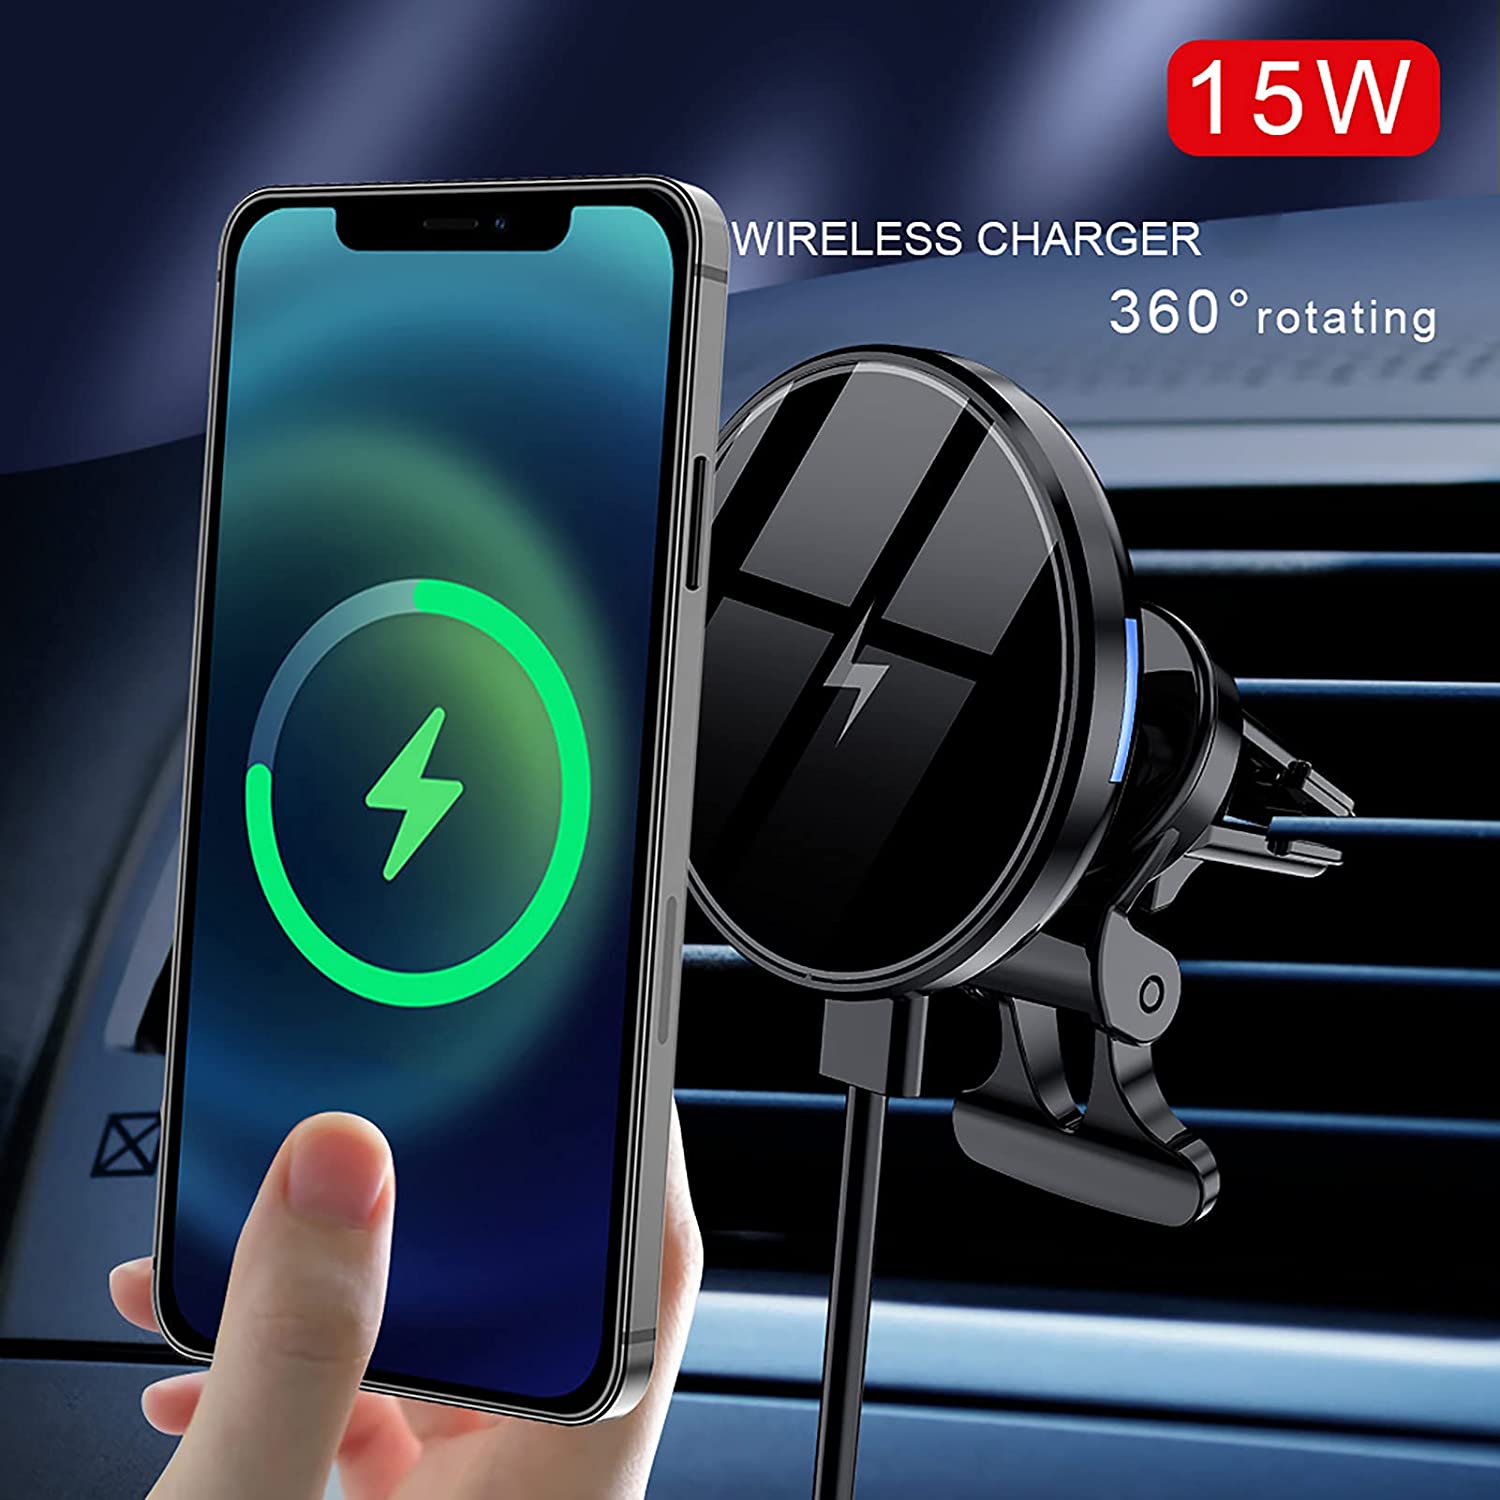 15W Magnetic Wireless Car Charger Mount Stand For iPhone 12 Pro Max Qi Fast Charging Magsafing Wireless Charger Car Phone Holder